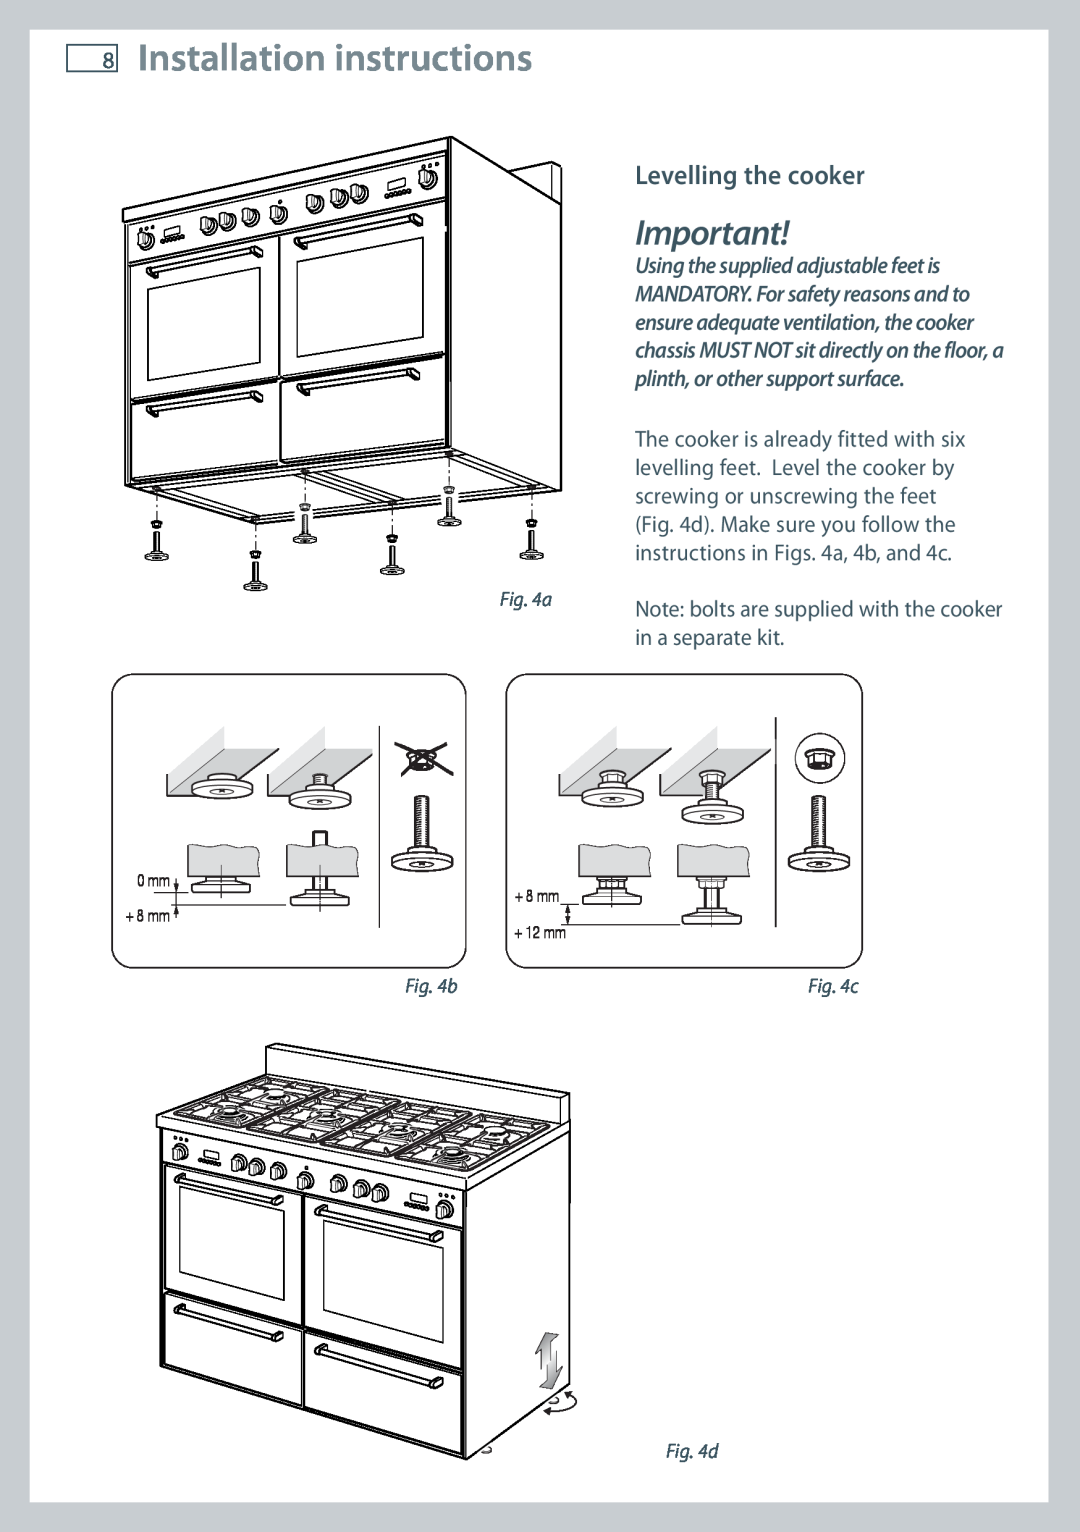 Fisher & Paykel OR120 installation instructions Installation instructions, Levelling the cooker, 0 mm + 8 mm + 8 mm + 12 mm 